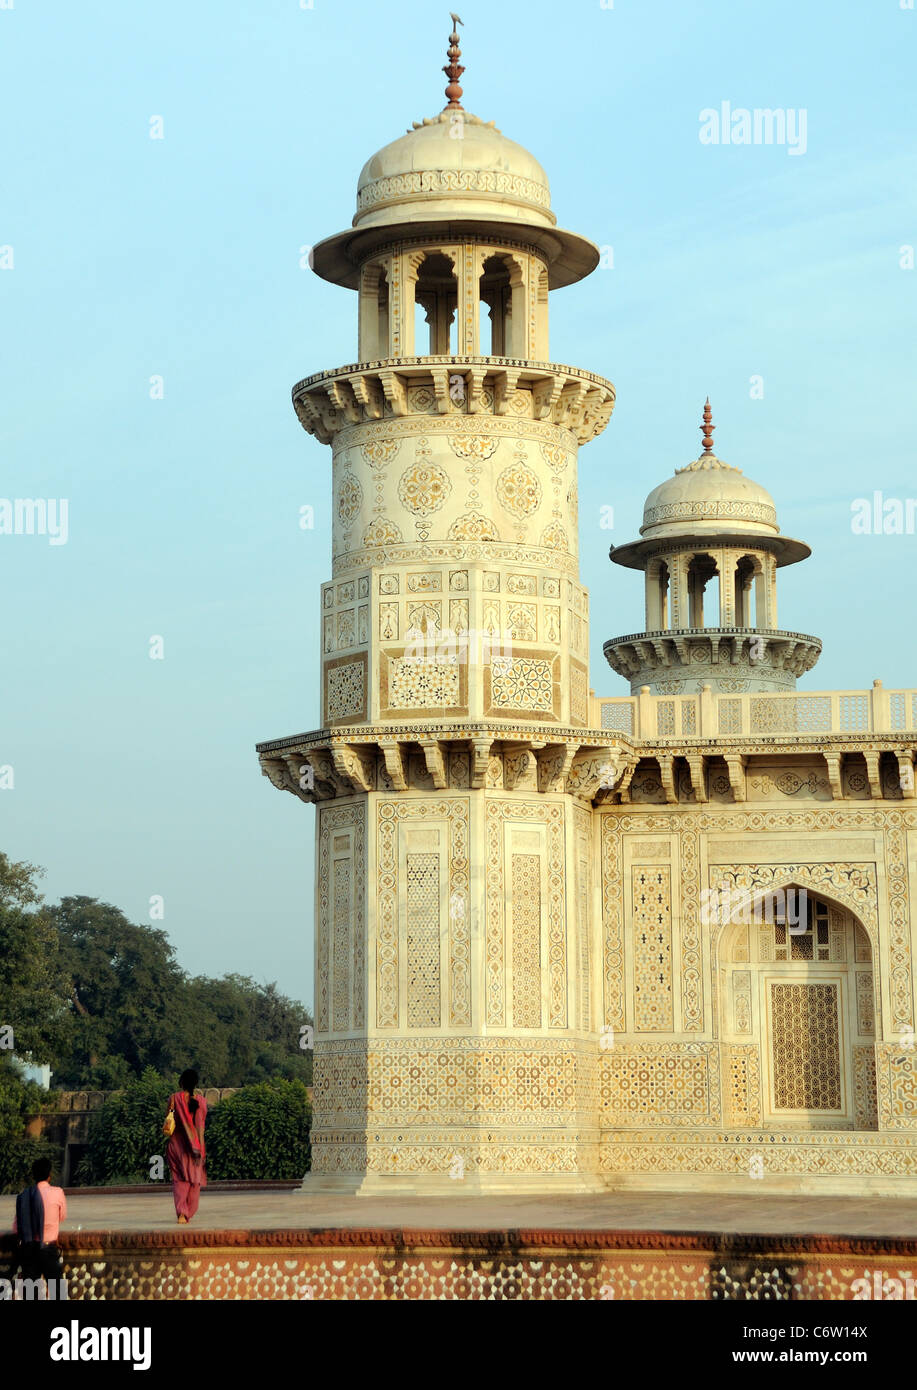 Highly ornate white marble tower at the  Tomb of Itimad ud Daulah whose name was Mirza Ghiyas Beg and his wife Asmat Begum. Agra Stock Photo